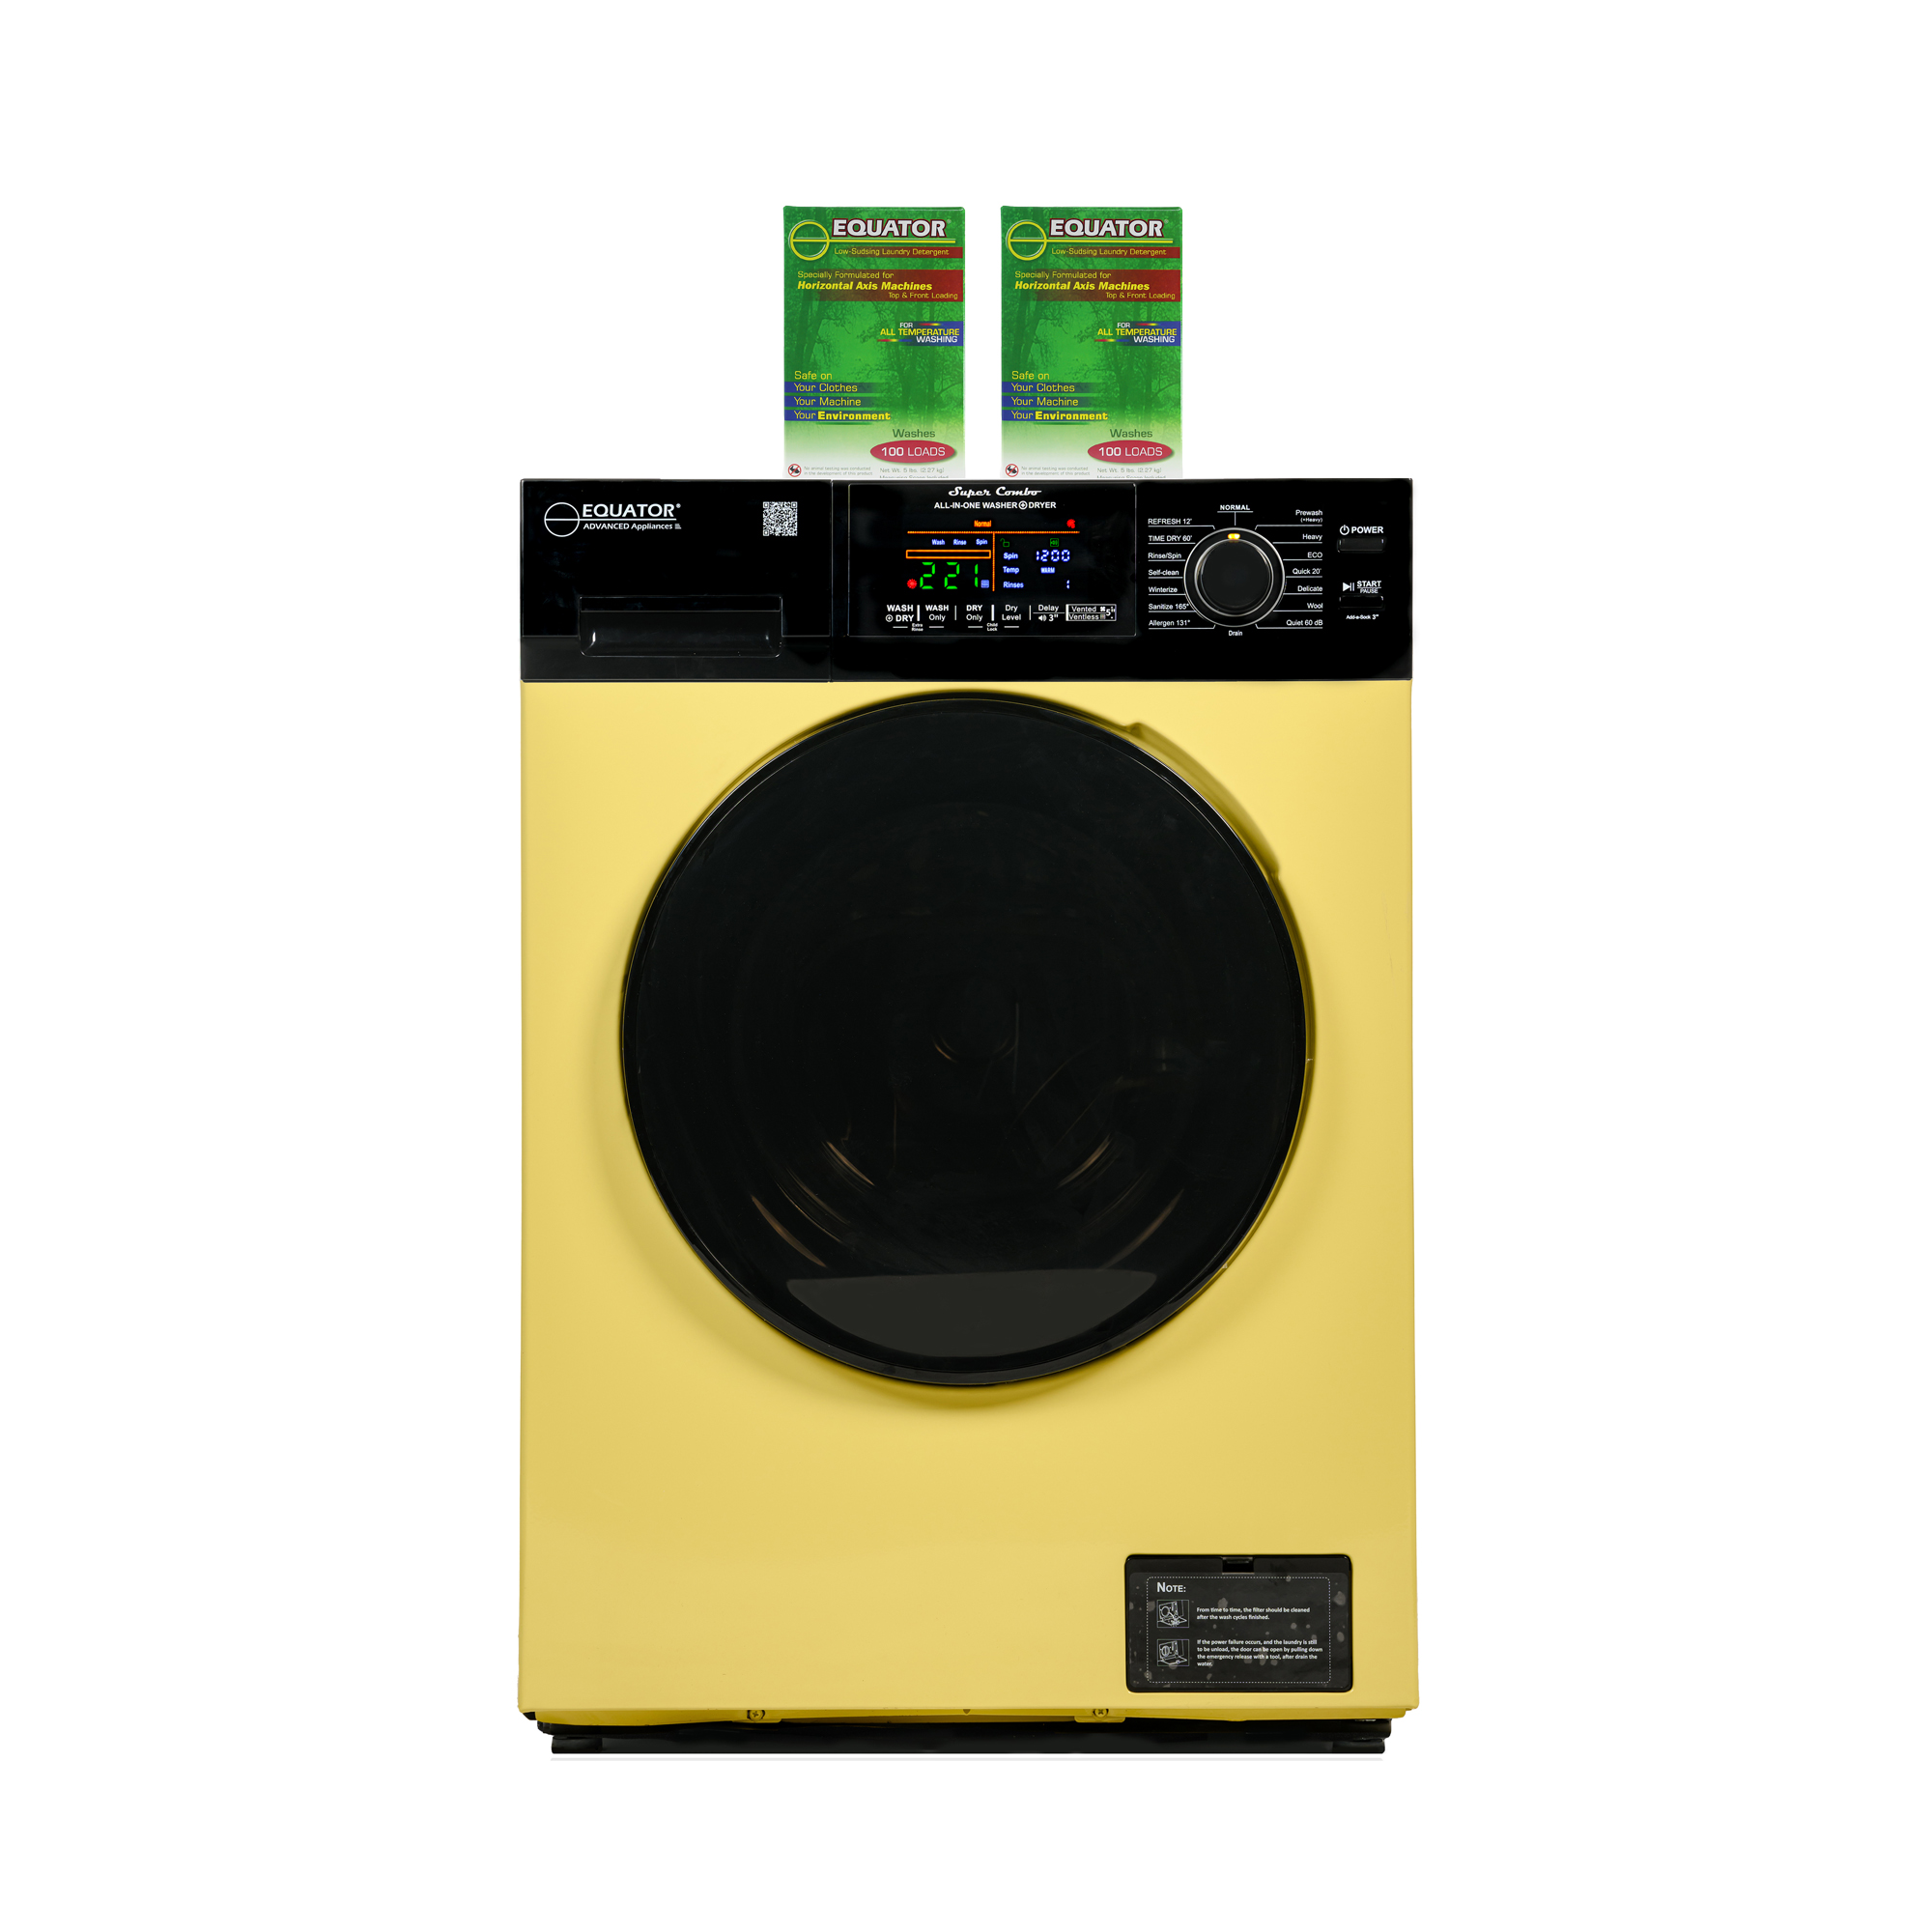 Equator Advanced Appliances EZ5500CVYellow//Black2BoxesofHED 18lb. Combination Washer Dryer w/ 2 Boxes of HE Detergent – Yellow/